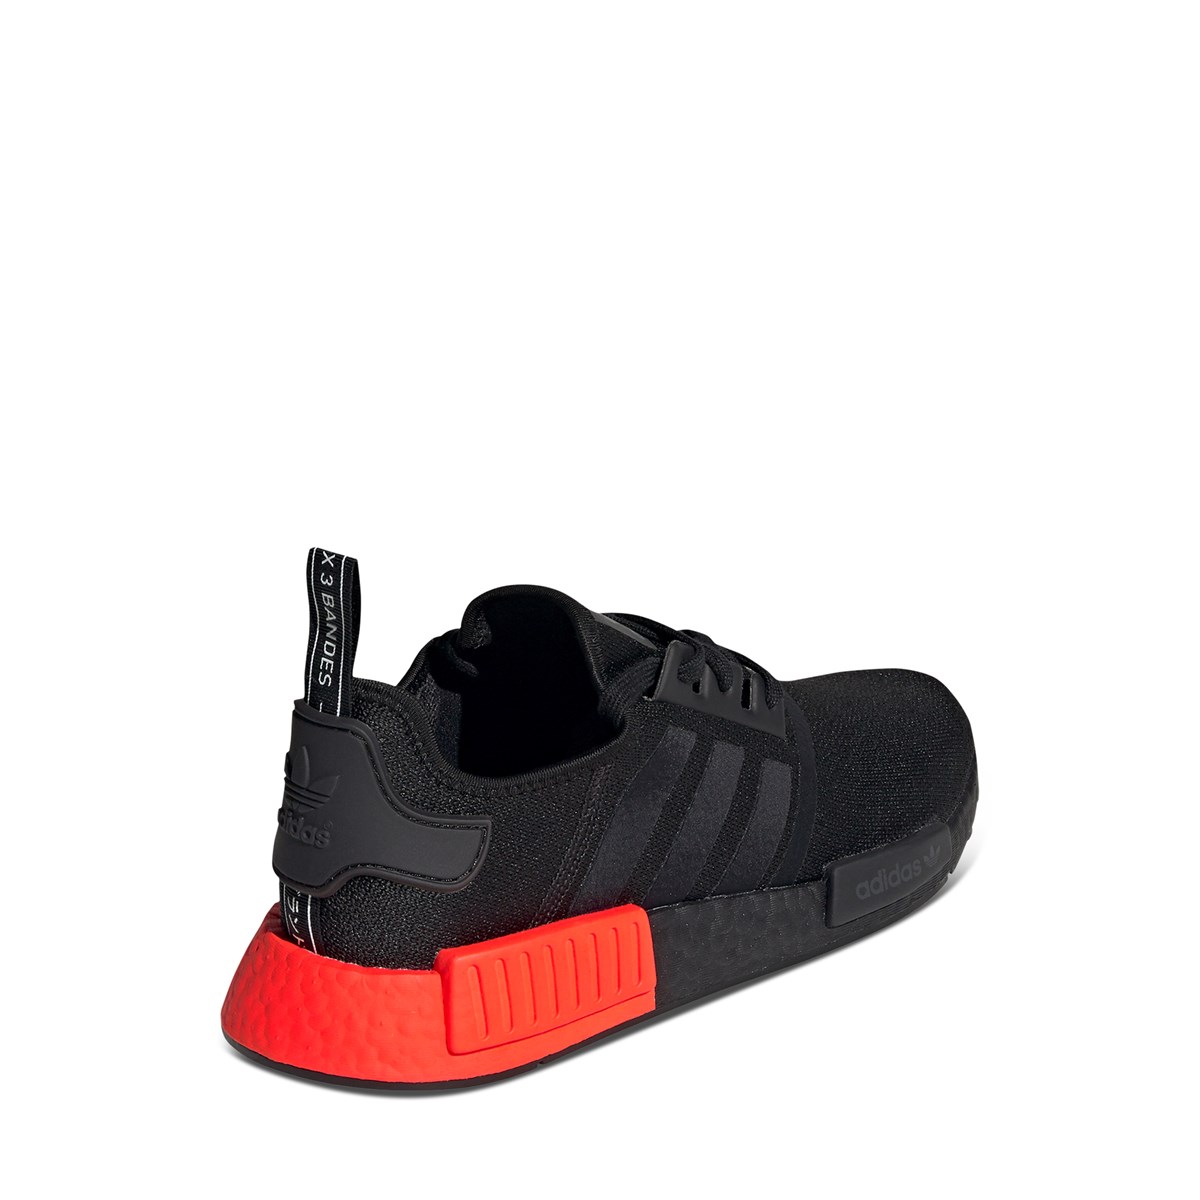 nmd_r1 shoes black and red